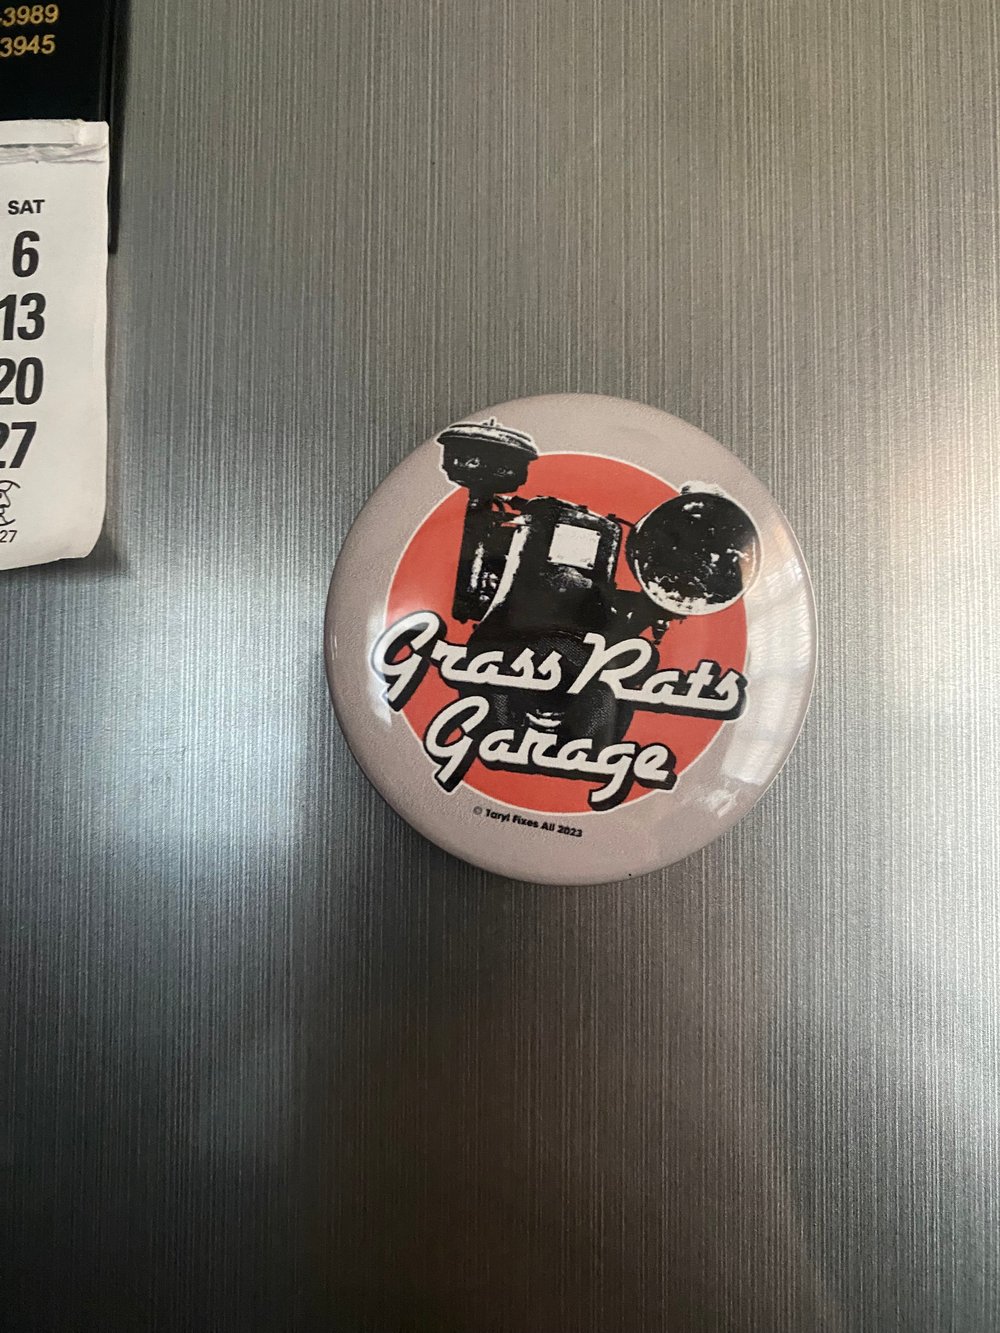 Large 2.25" NEW! NEW! Grass Rate Garage Button or Bottle Opener Magnet!